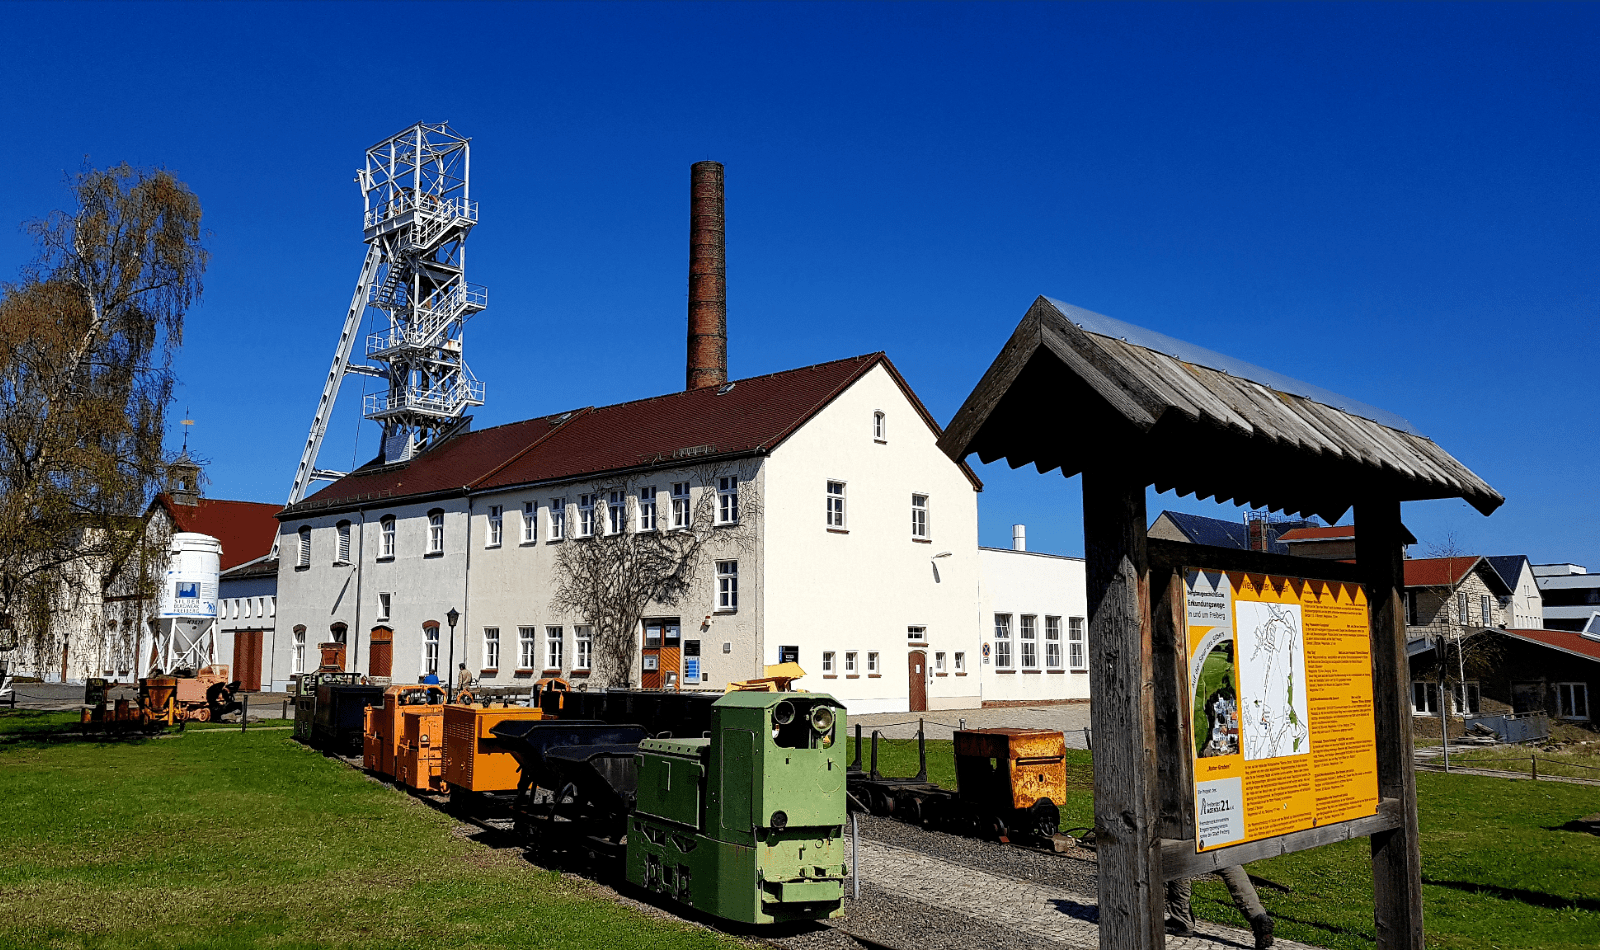 Outer view of the old silver mine Reiche Zeche in Freiberg, Germany